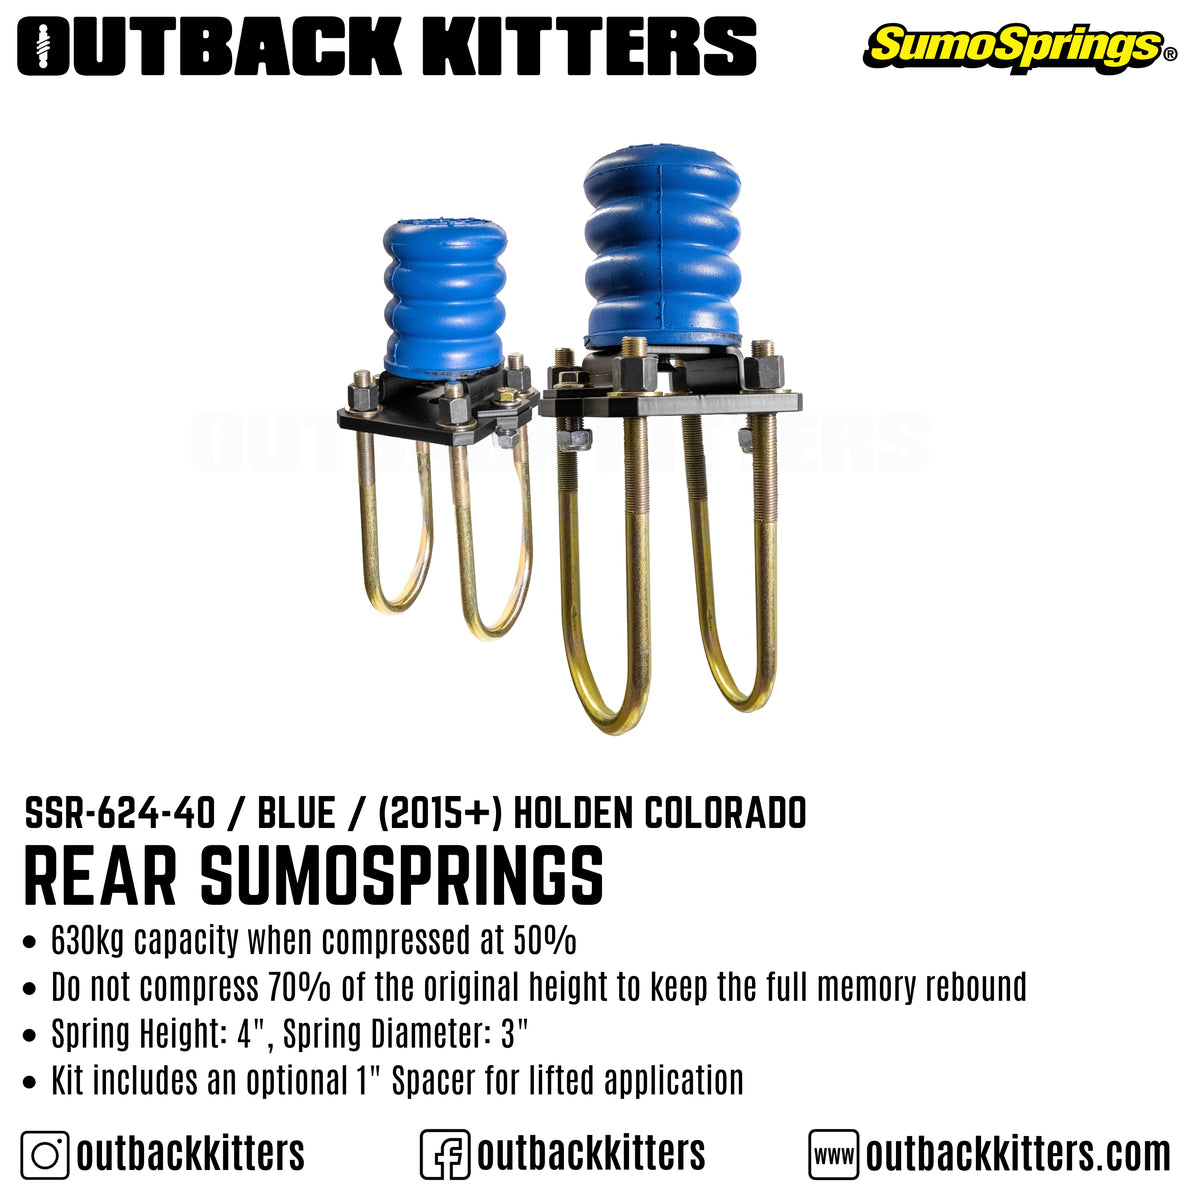 Rear SumoSprings to suit 2015+ Holden Colorado - Outback Kitters